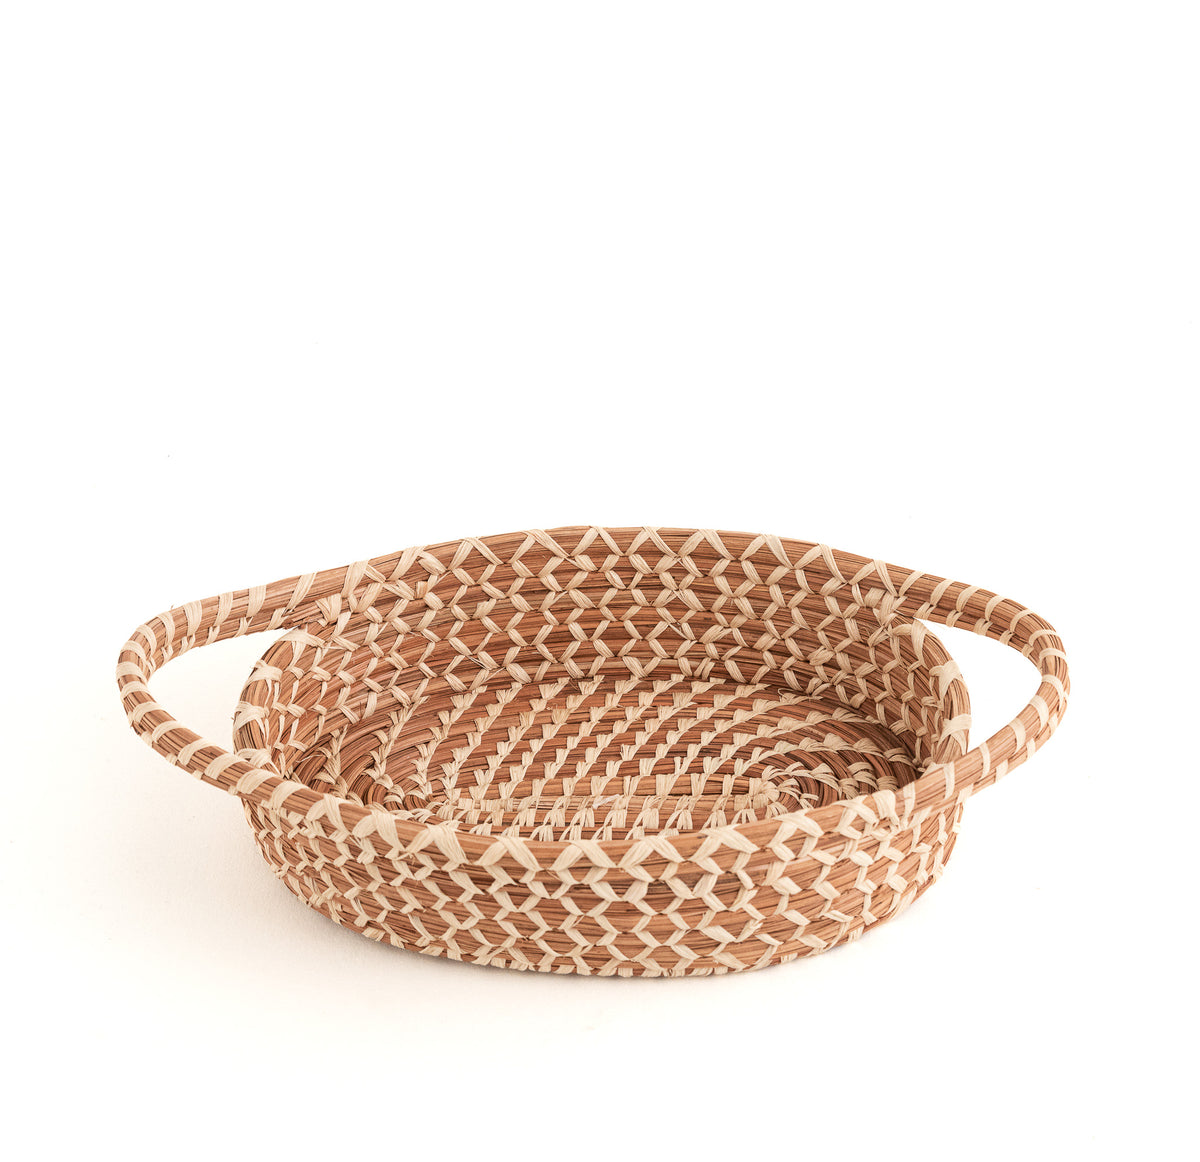 oval pine needle basket with handles, 3/4 view